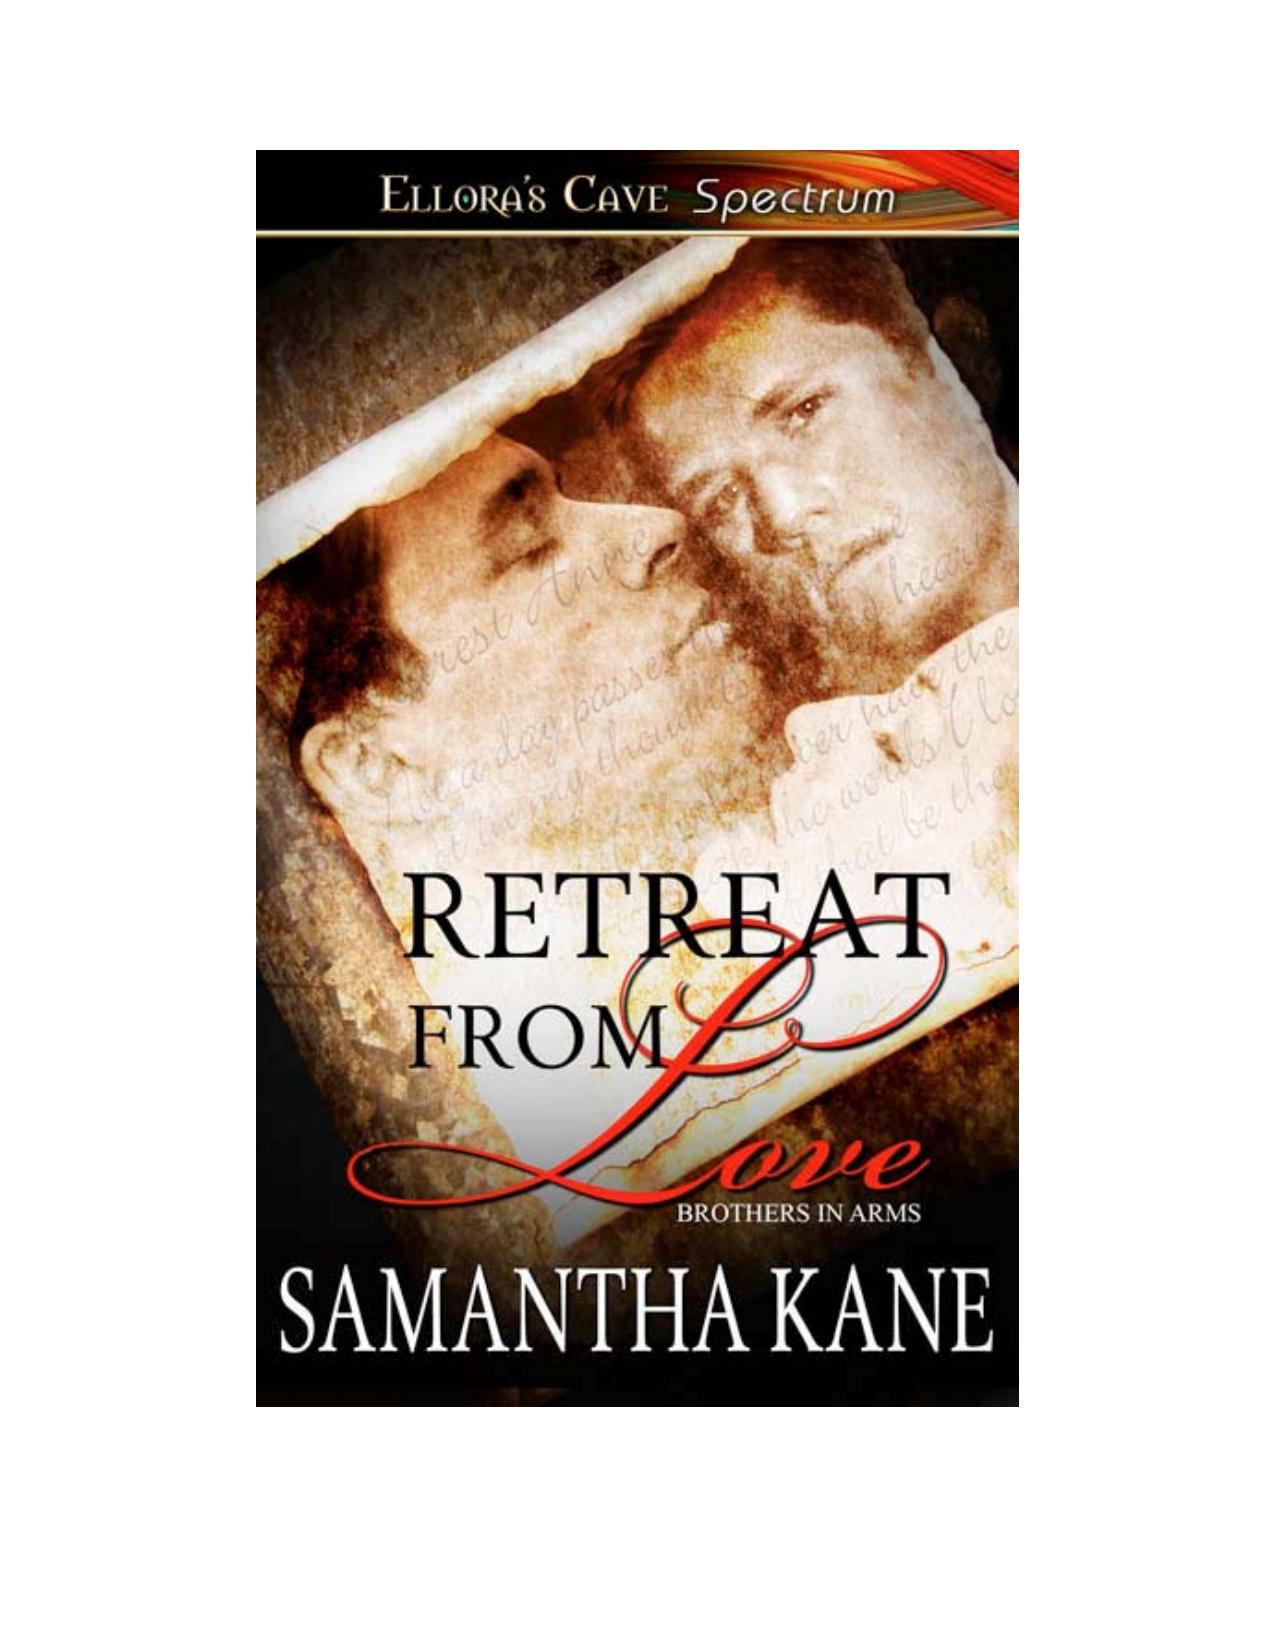 Retreat From Love by Samantha Kane - free ebooks download